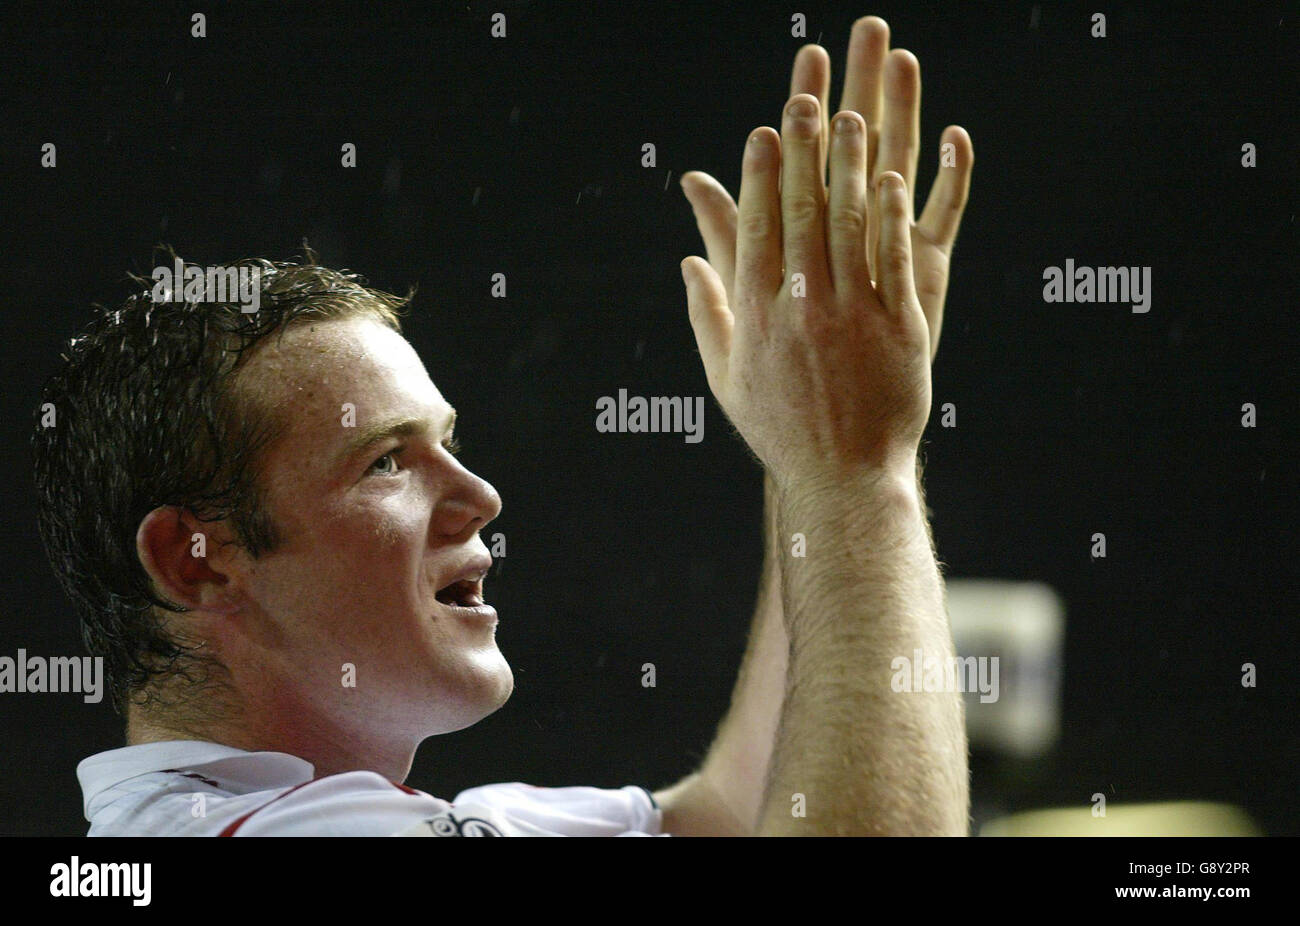 England's Wayne Rooney applauds the crowd after defeating Poland 2-1 in the World Cup qualifying match at Old Trafford, Manchester, Wednesday October 12, 2005. PRESS ASSOCIATION Photo. Photo credit should read: Owen Humphreys/PA. Stock Photo